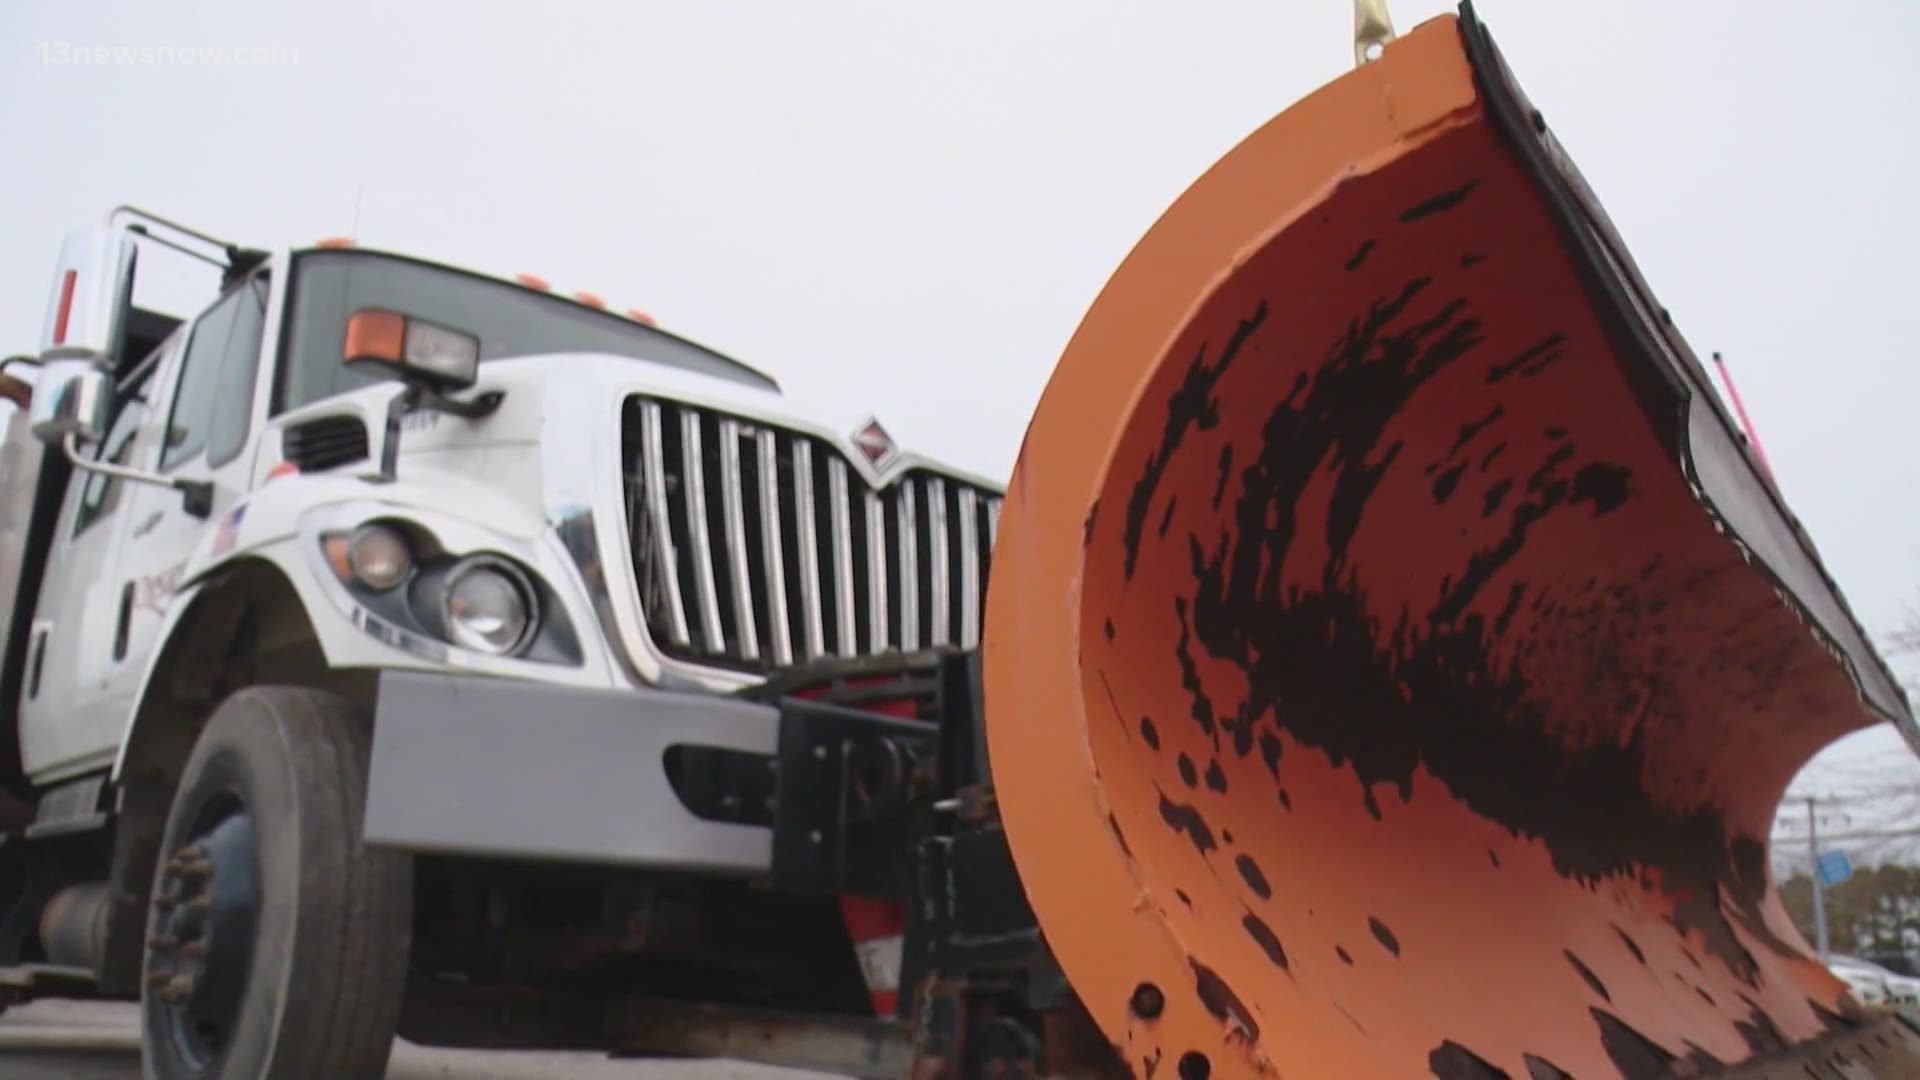 The region is expected to see a mix of rain and snow on Jan. 28. Crews have started making preparations on the roads to prevent any traffic hiccups.